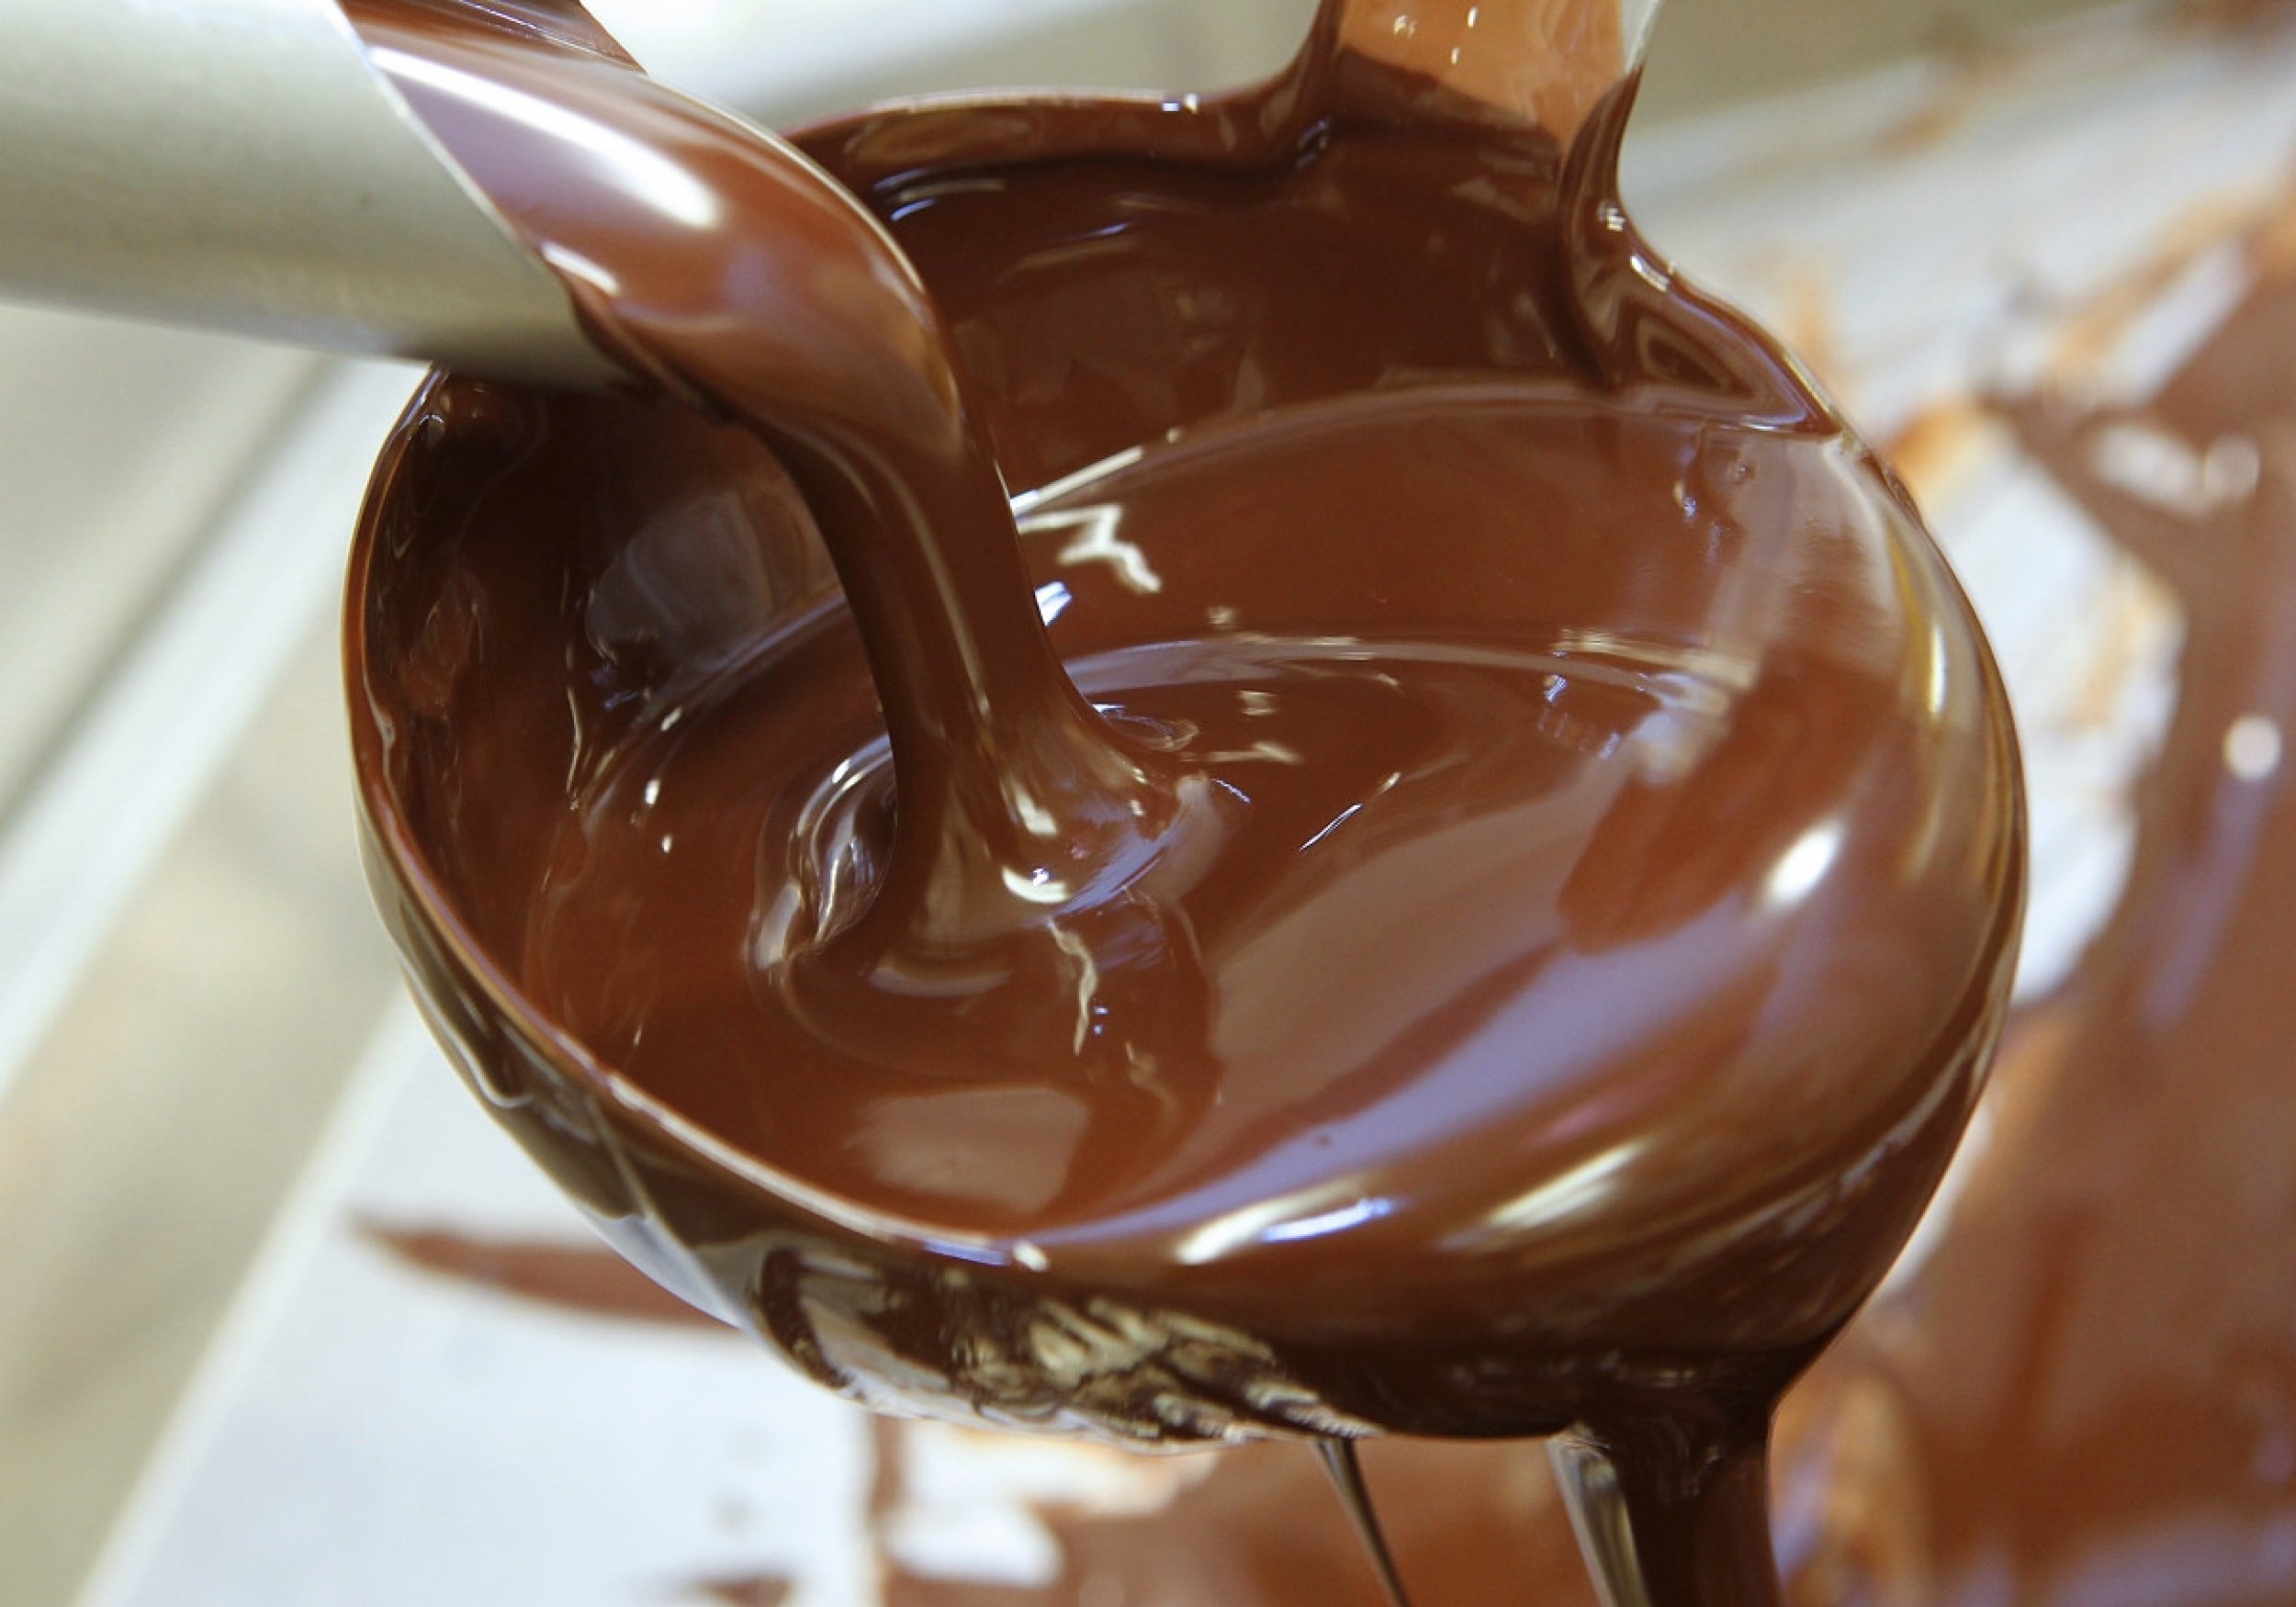 Four health benefits of eating chocolate